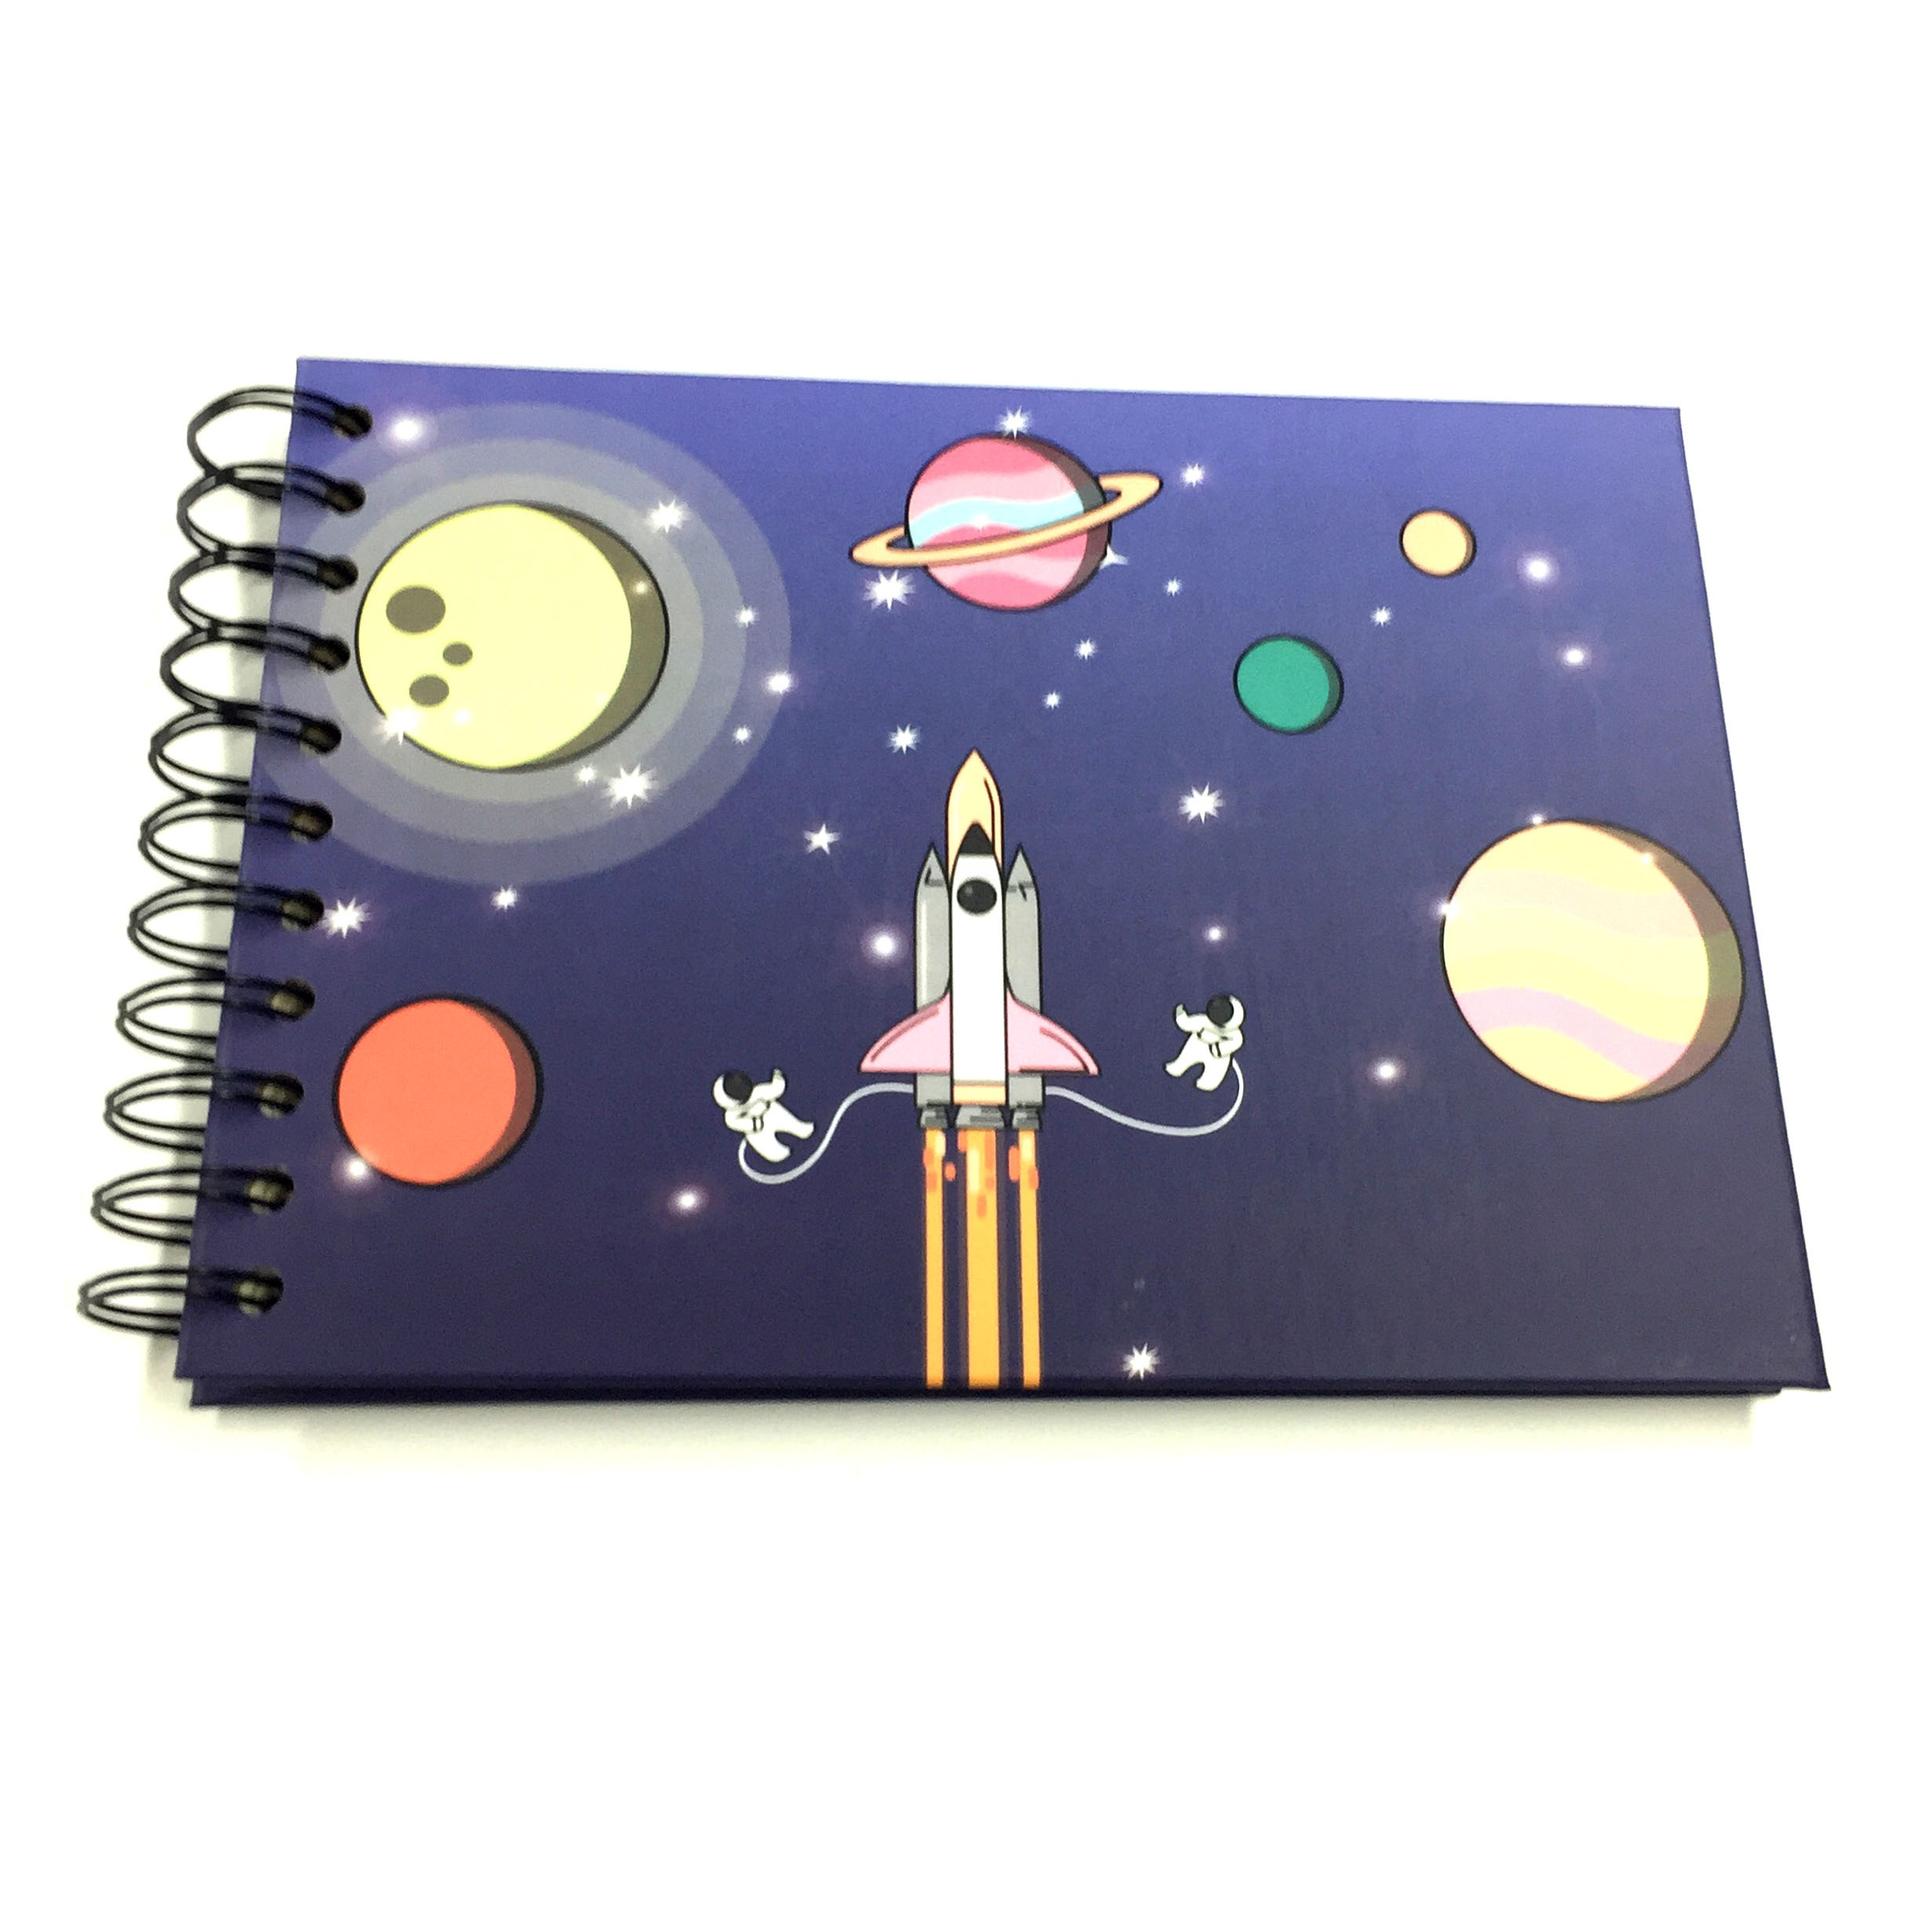 product-Bulk Purchase Spiral Bound 5x7 Self Stick Photo Album With 20 Pages for lovers,kids,as gift--2